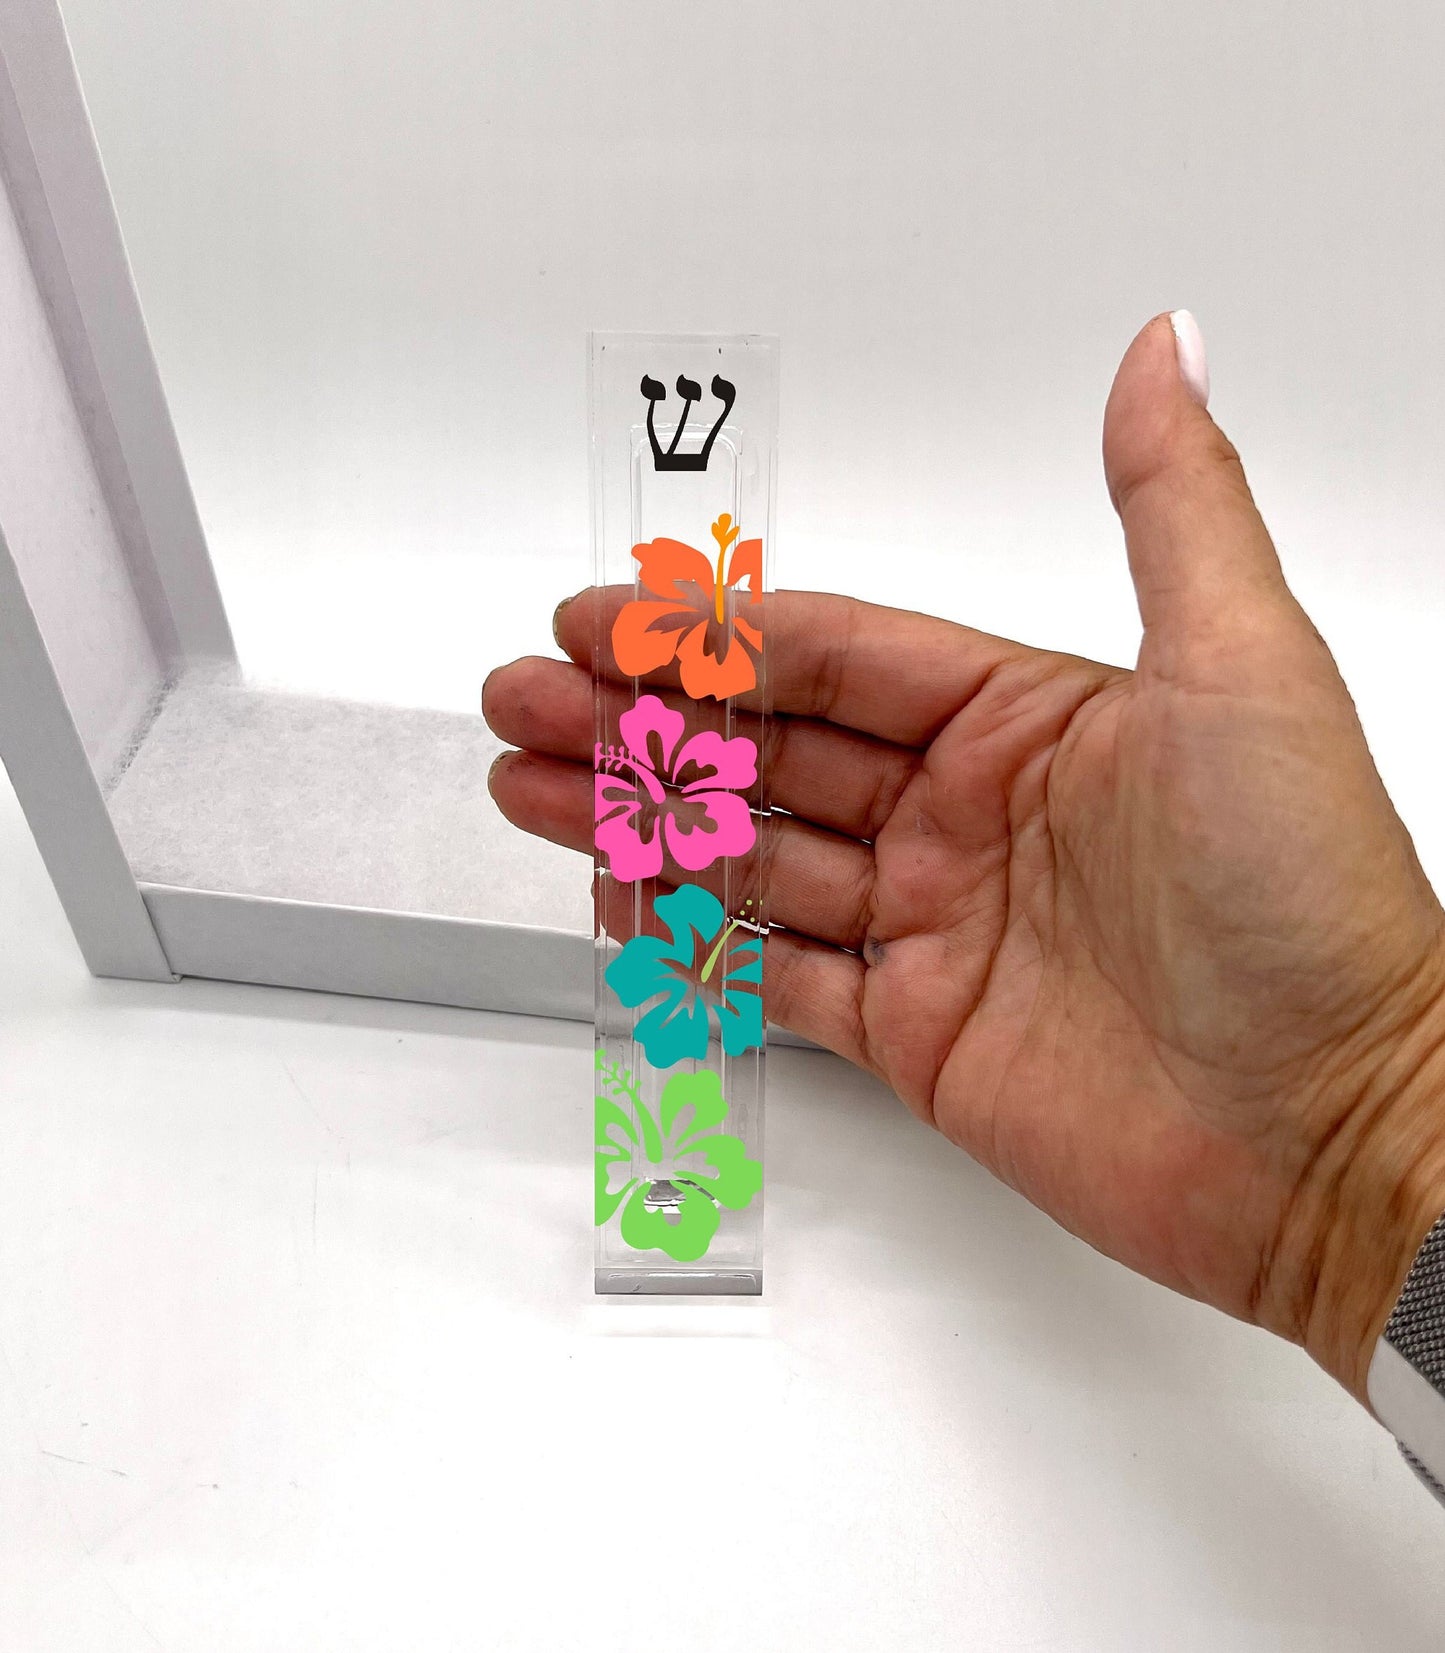 Personalized Mezuzah - With or without name - Hibiscus Flower Mezuzah - Colorful Modern Mezuzah - Custom Mezuzah  - New Home Gift